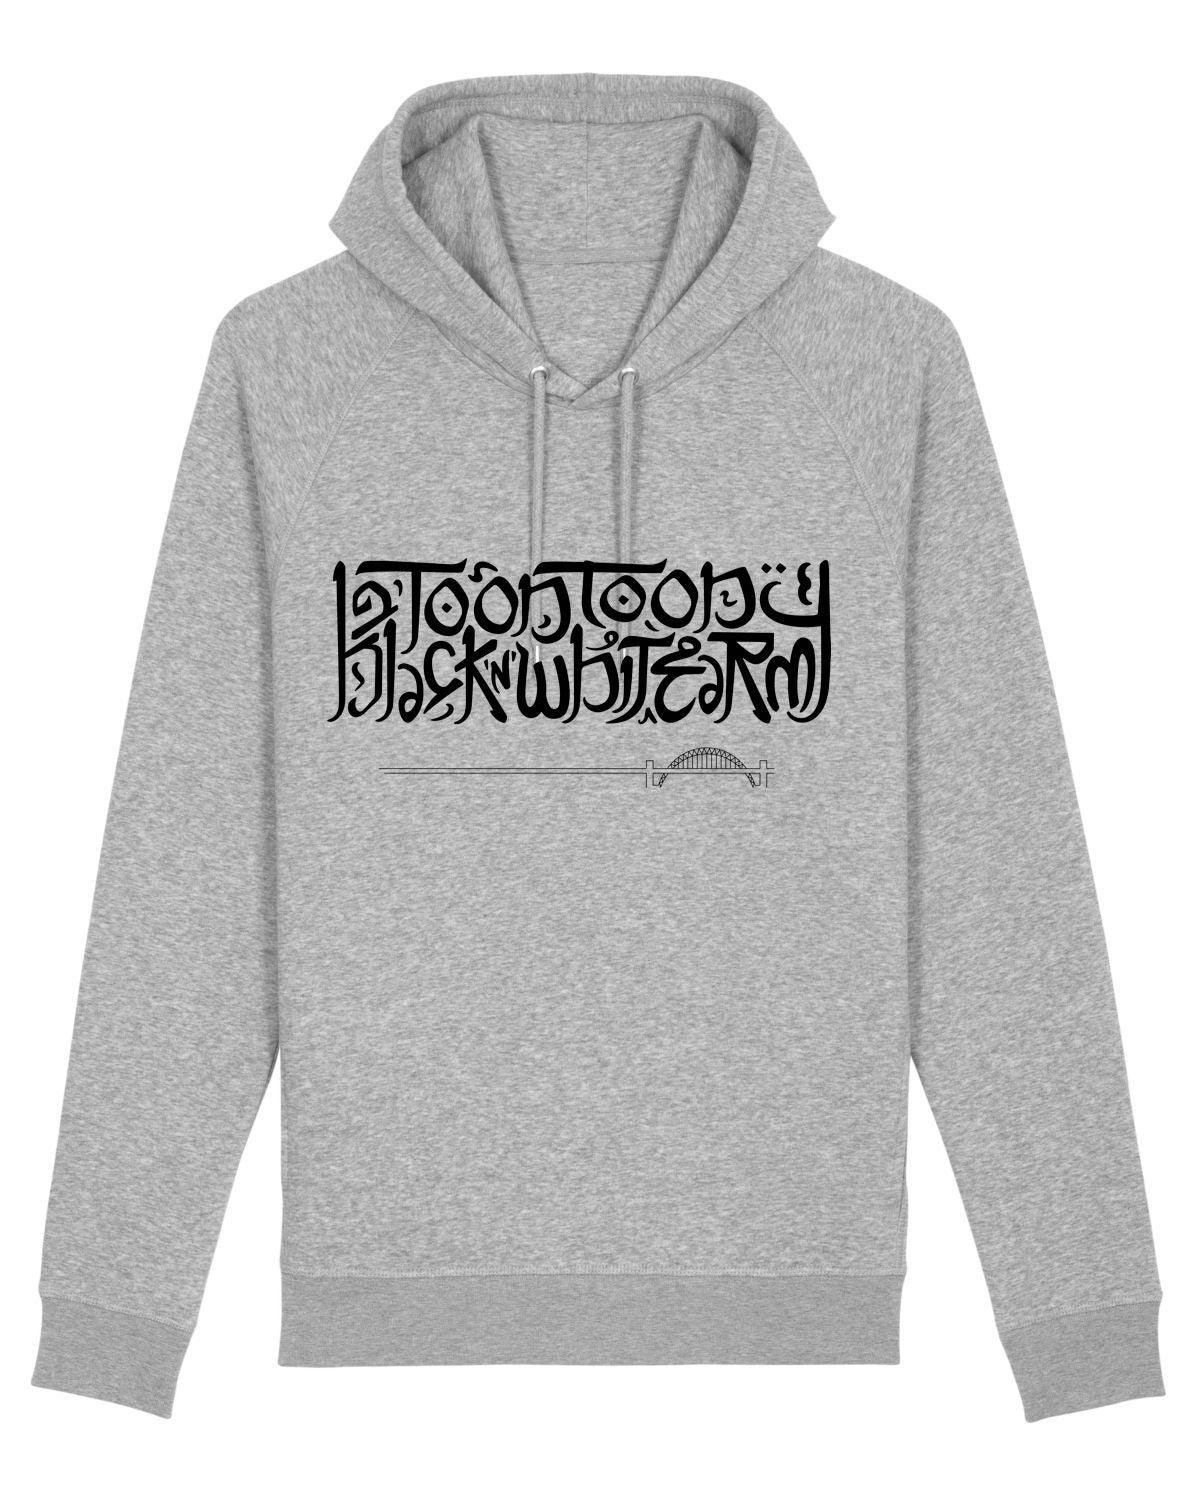 TOON TOON BLACK 'N' WHITE ARMY: Hoodie from NUFC East Stand 65 (4 Colour Options) - SOUND IS COLOUR